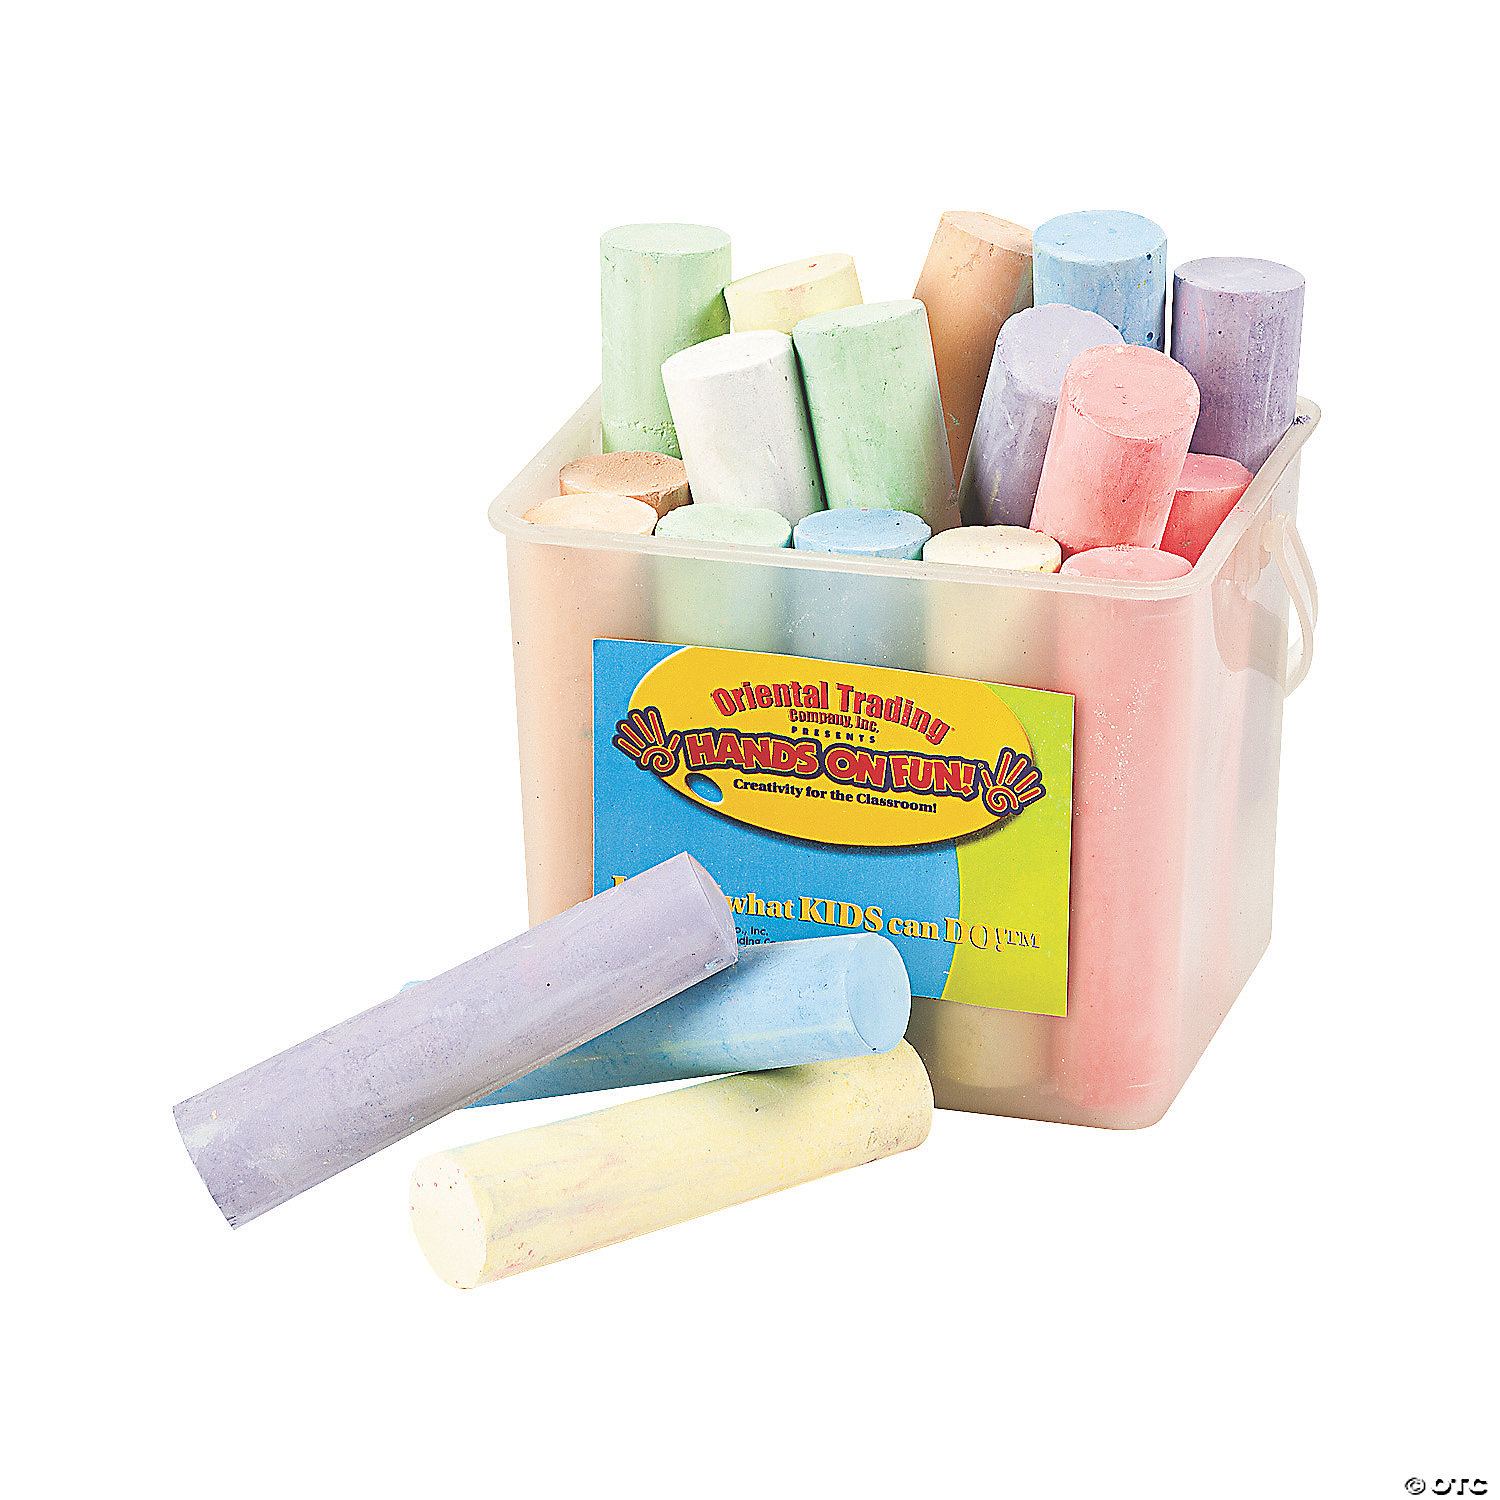 Non-toxic and Washable in Strong Plastic Box 37 Count Jumbo Dusico Sidewalk Chalk 9 Colors 